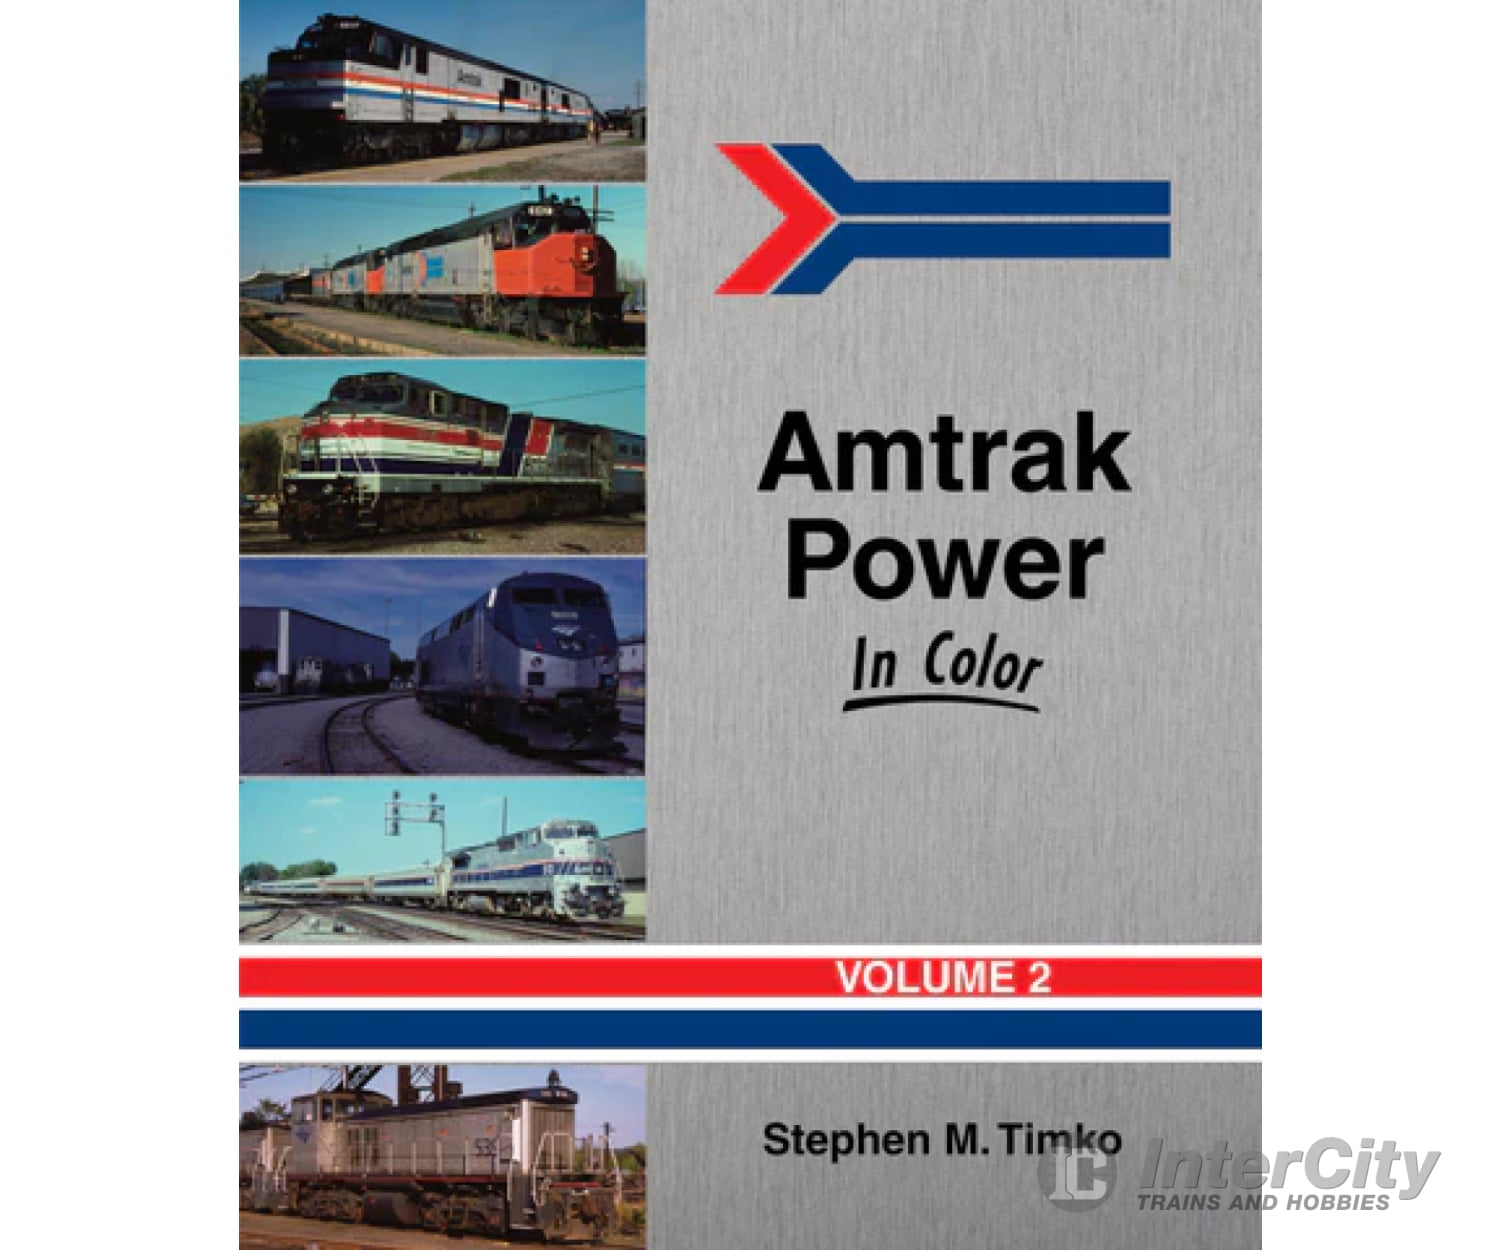 Amtrak Power In Color Volume 2 By Stephen M. Timko Morning Sun Books